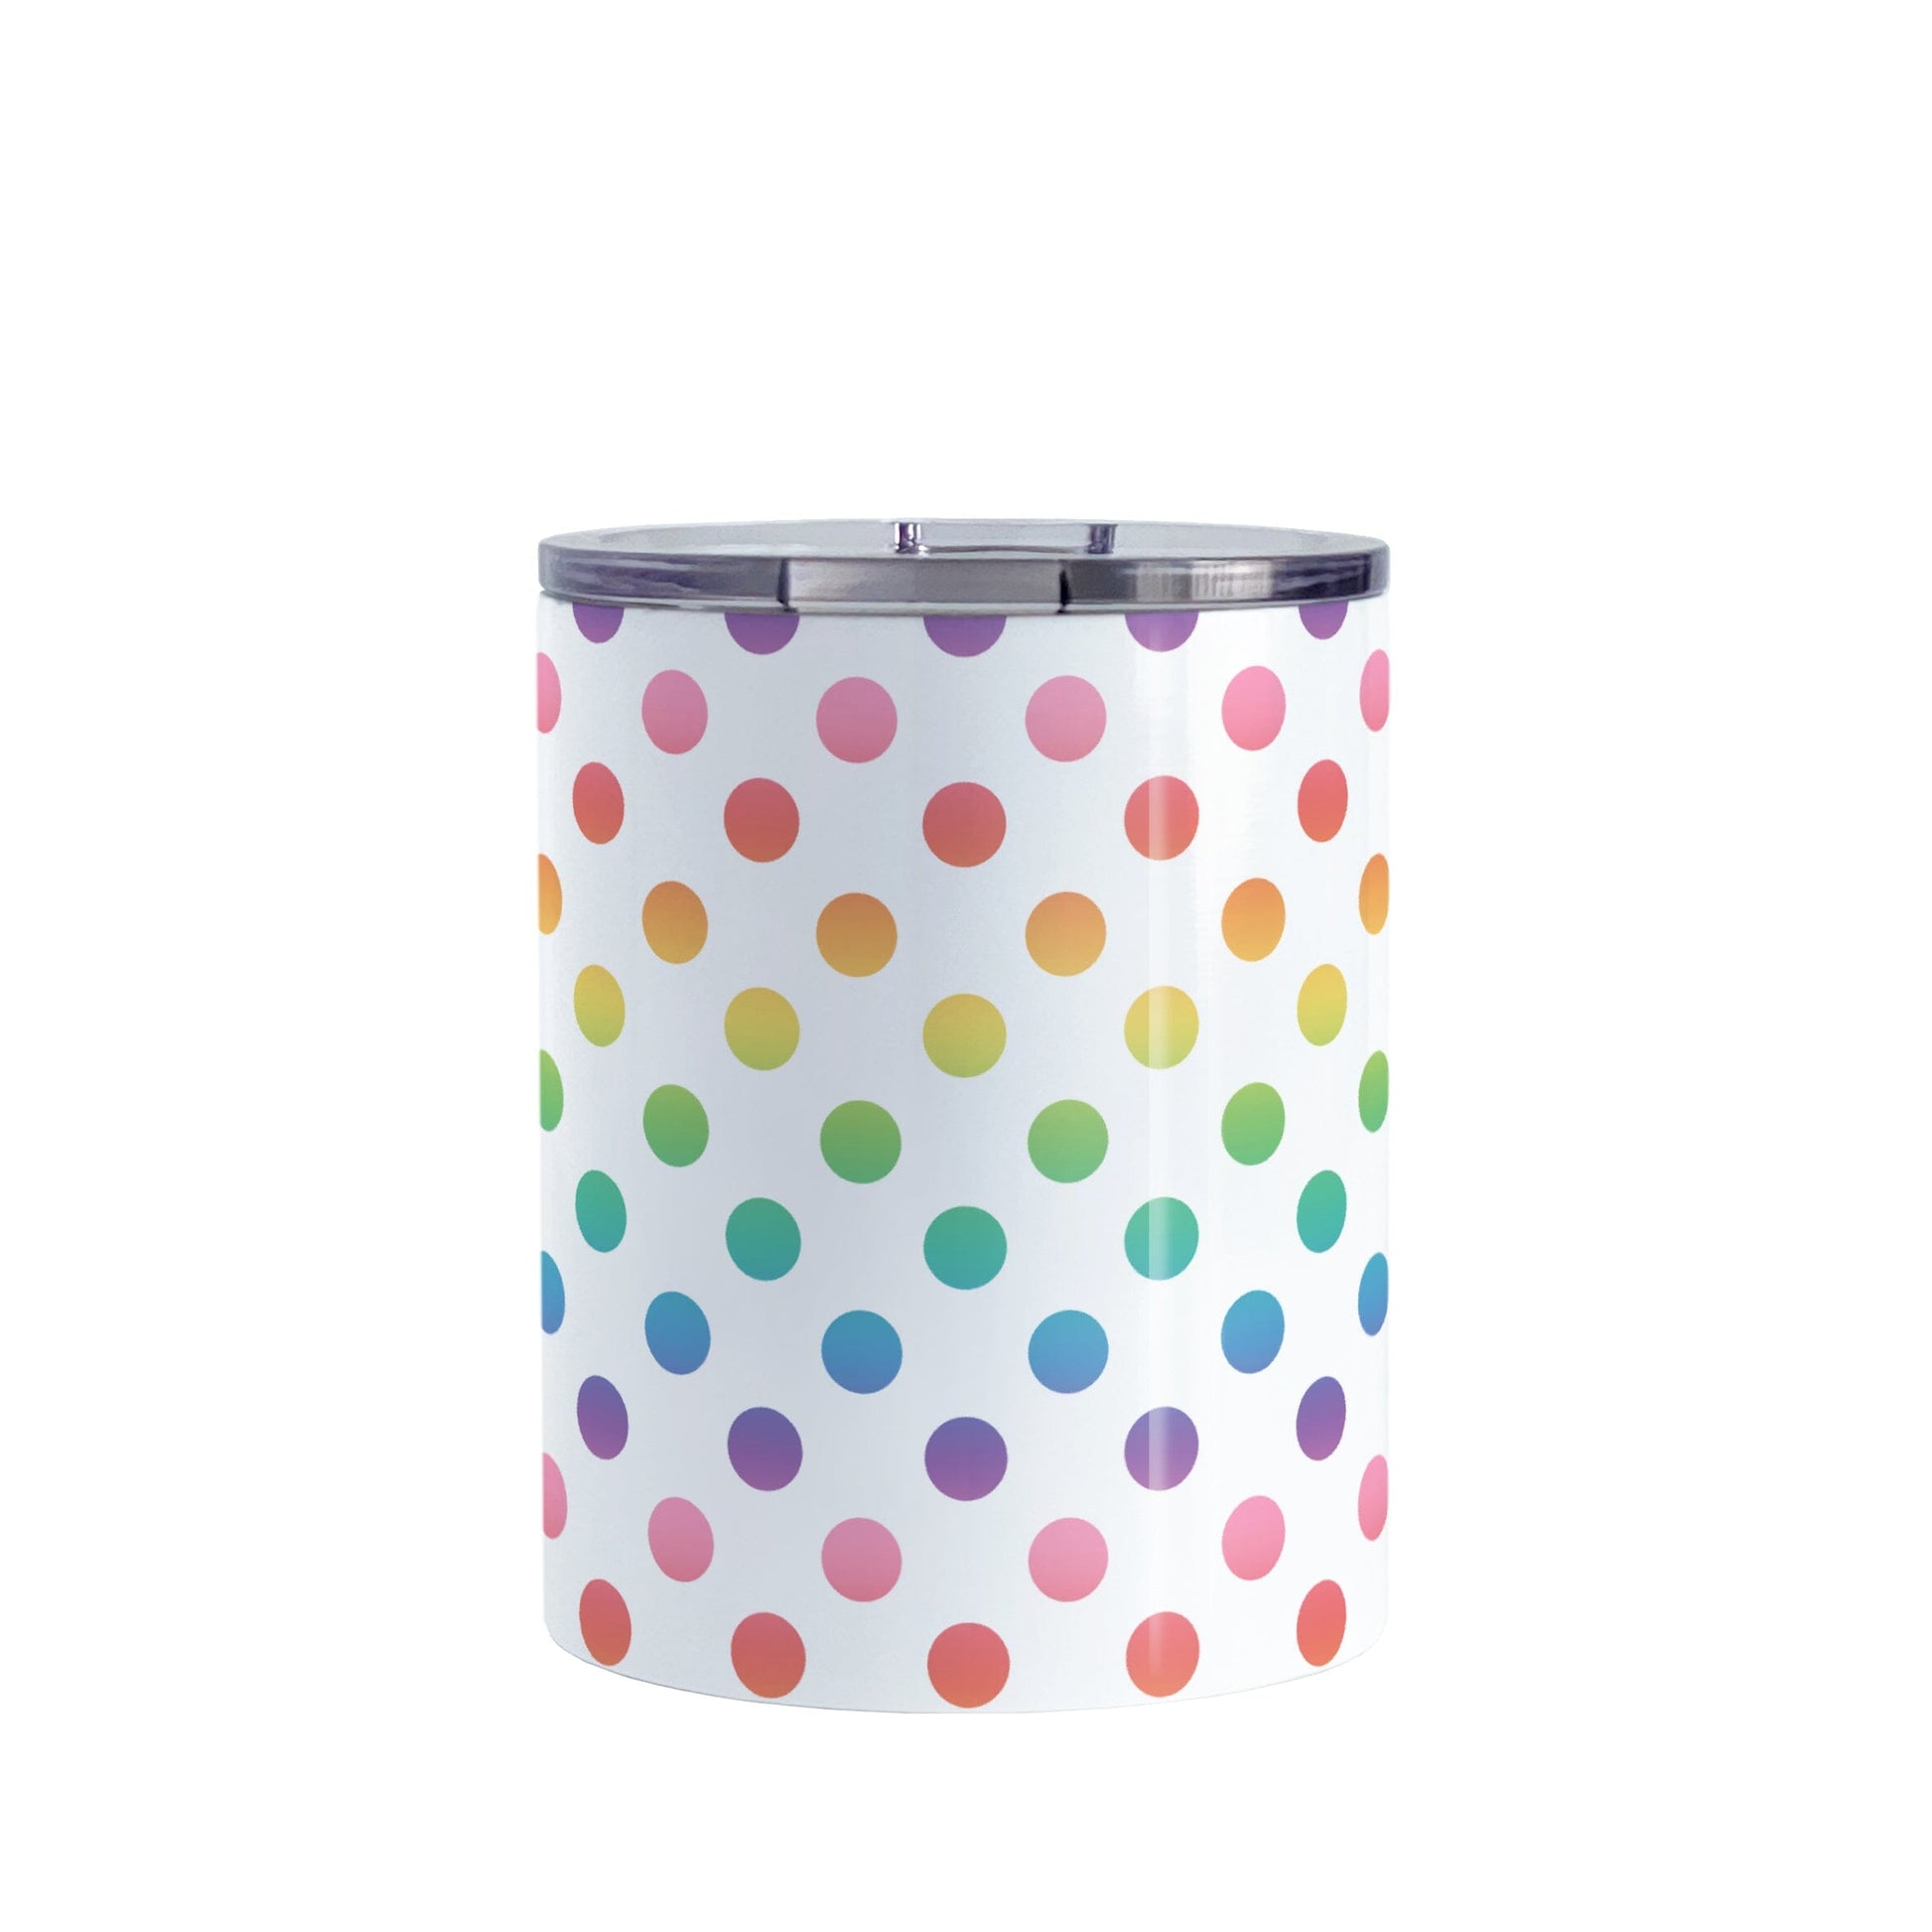 Rainbow Polka Dots Tumbler Cup (10oz) at Amy's Coffee Mugs. A stainless steel tumbler cup designed with a colorful pattern of polka dots in a rainbow color progression that wraps around the cup. 